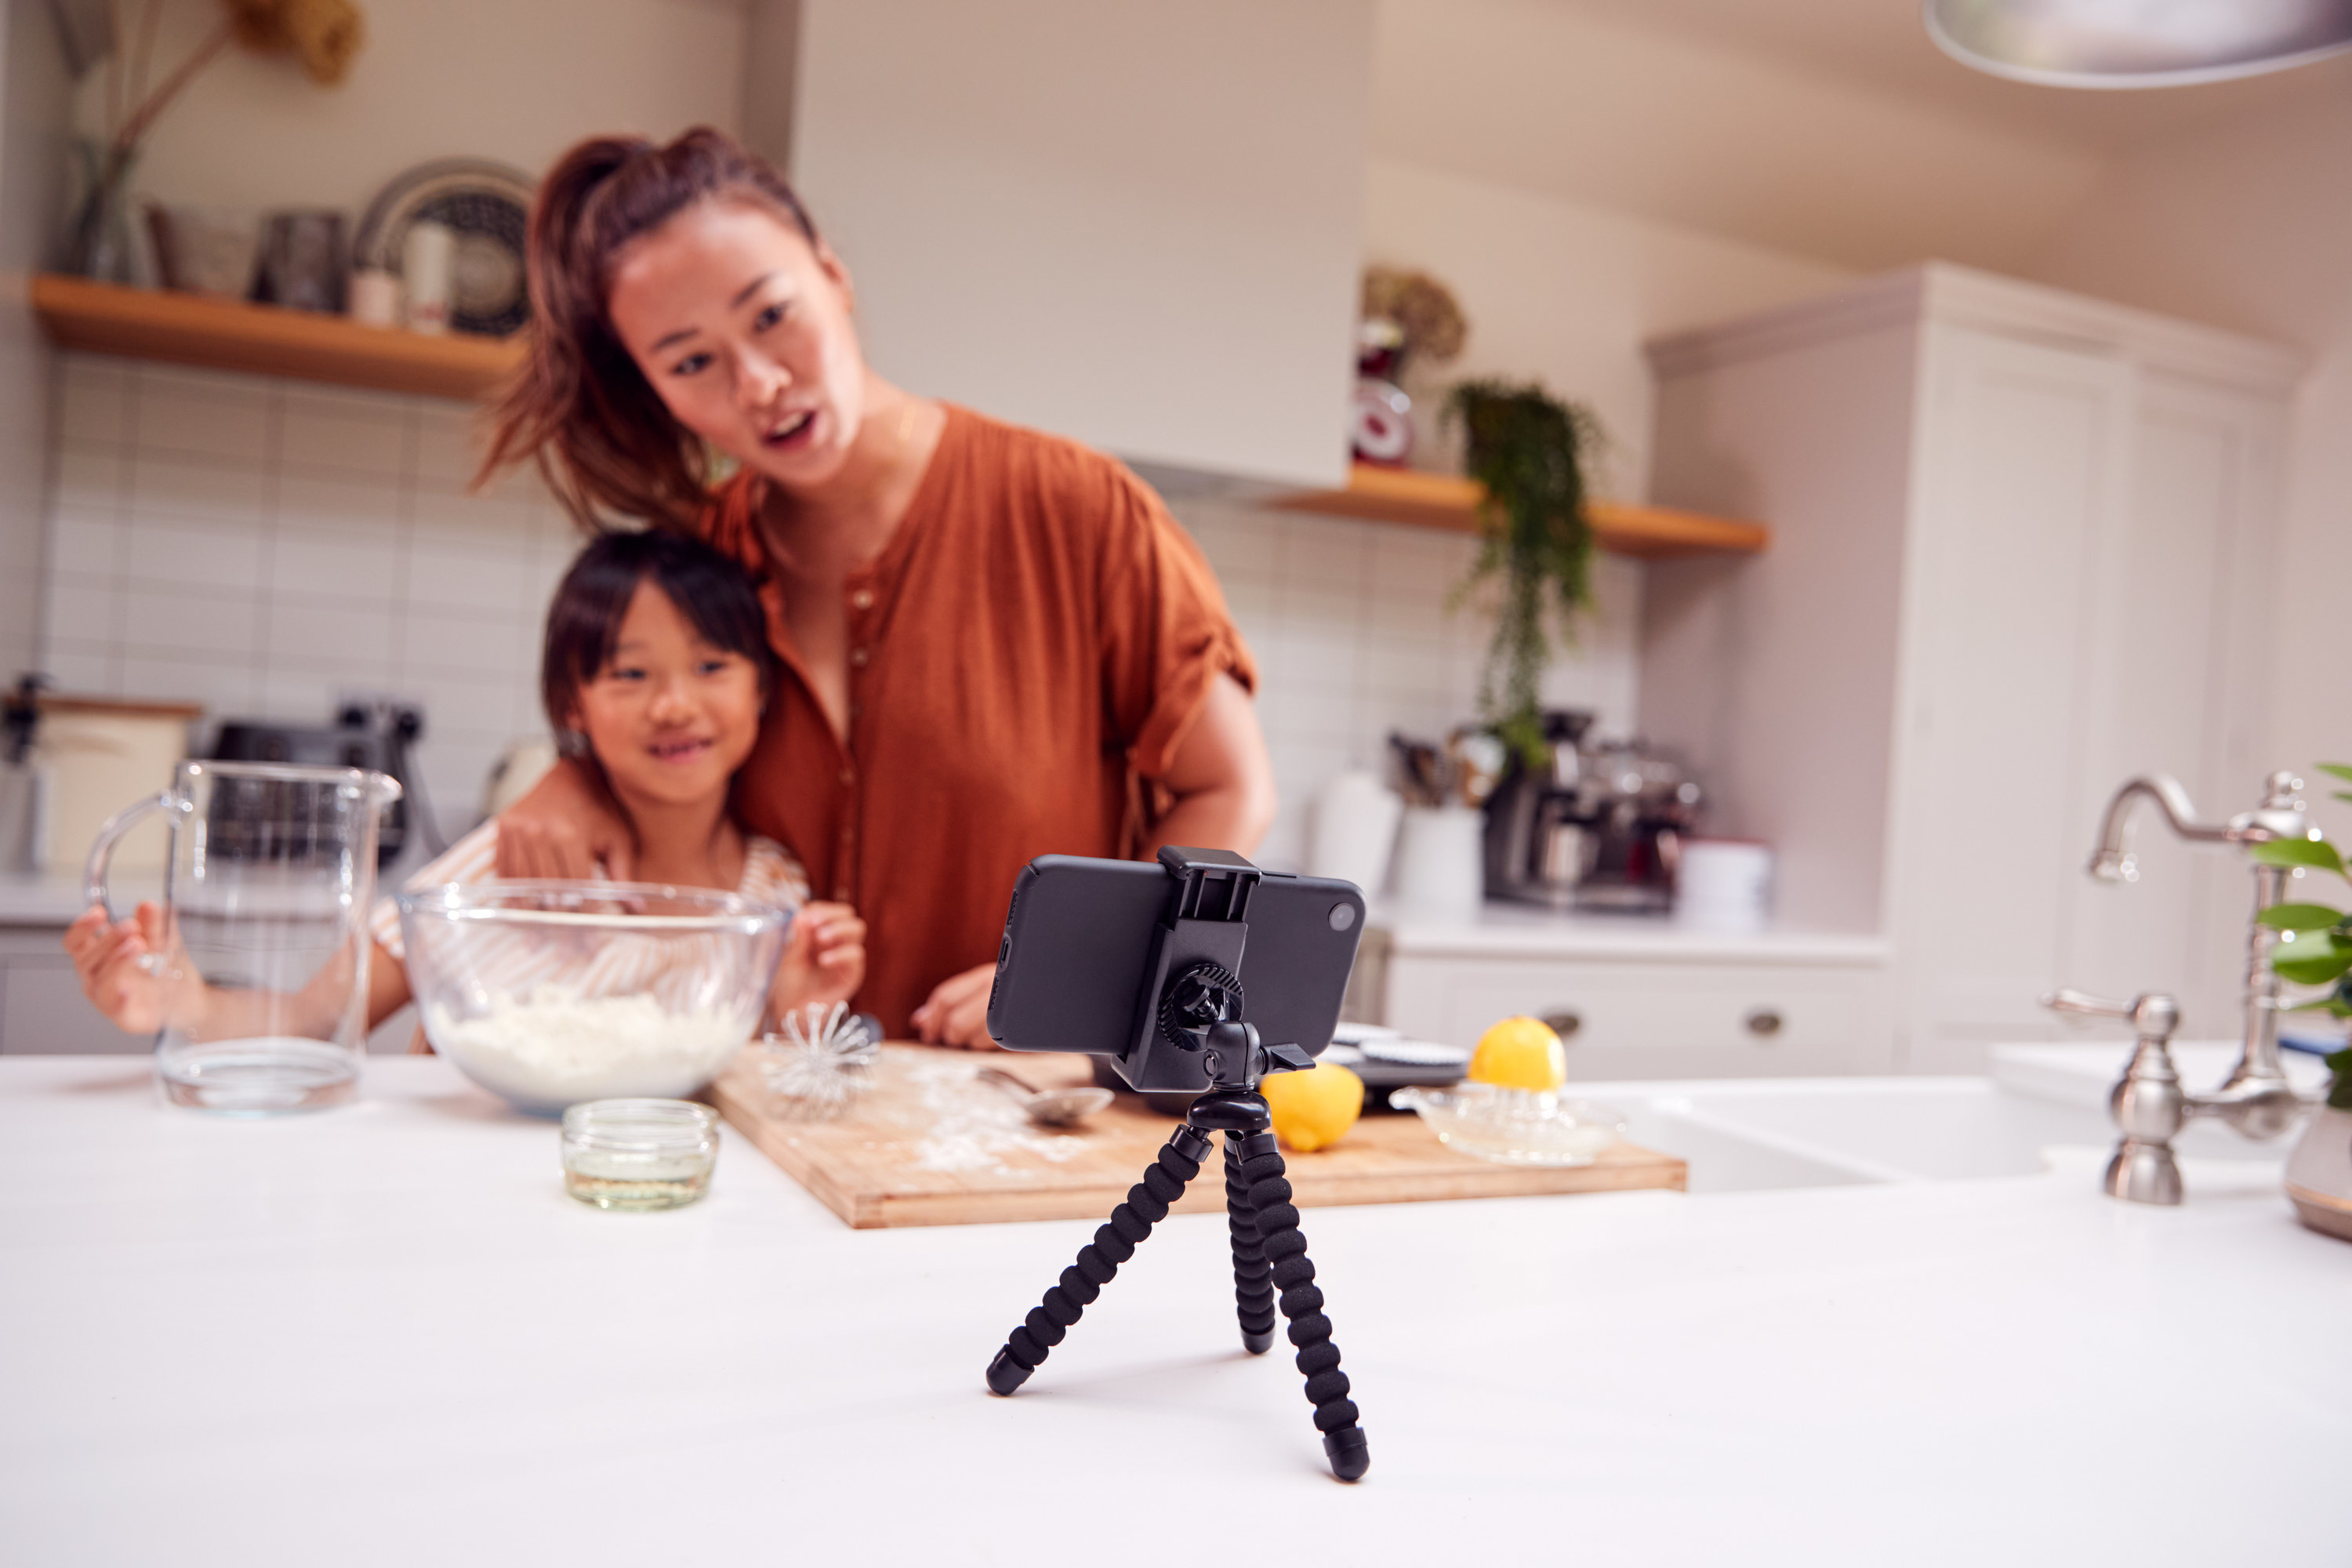 mom and daughter vlogging in their kitchen at home